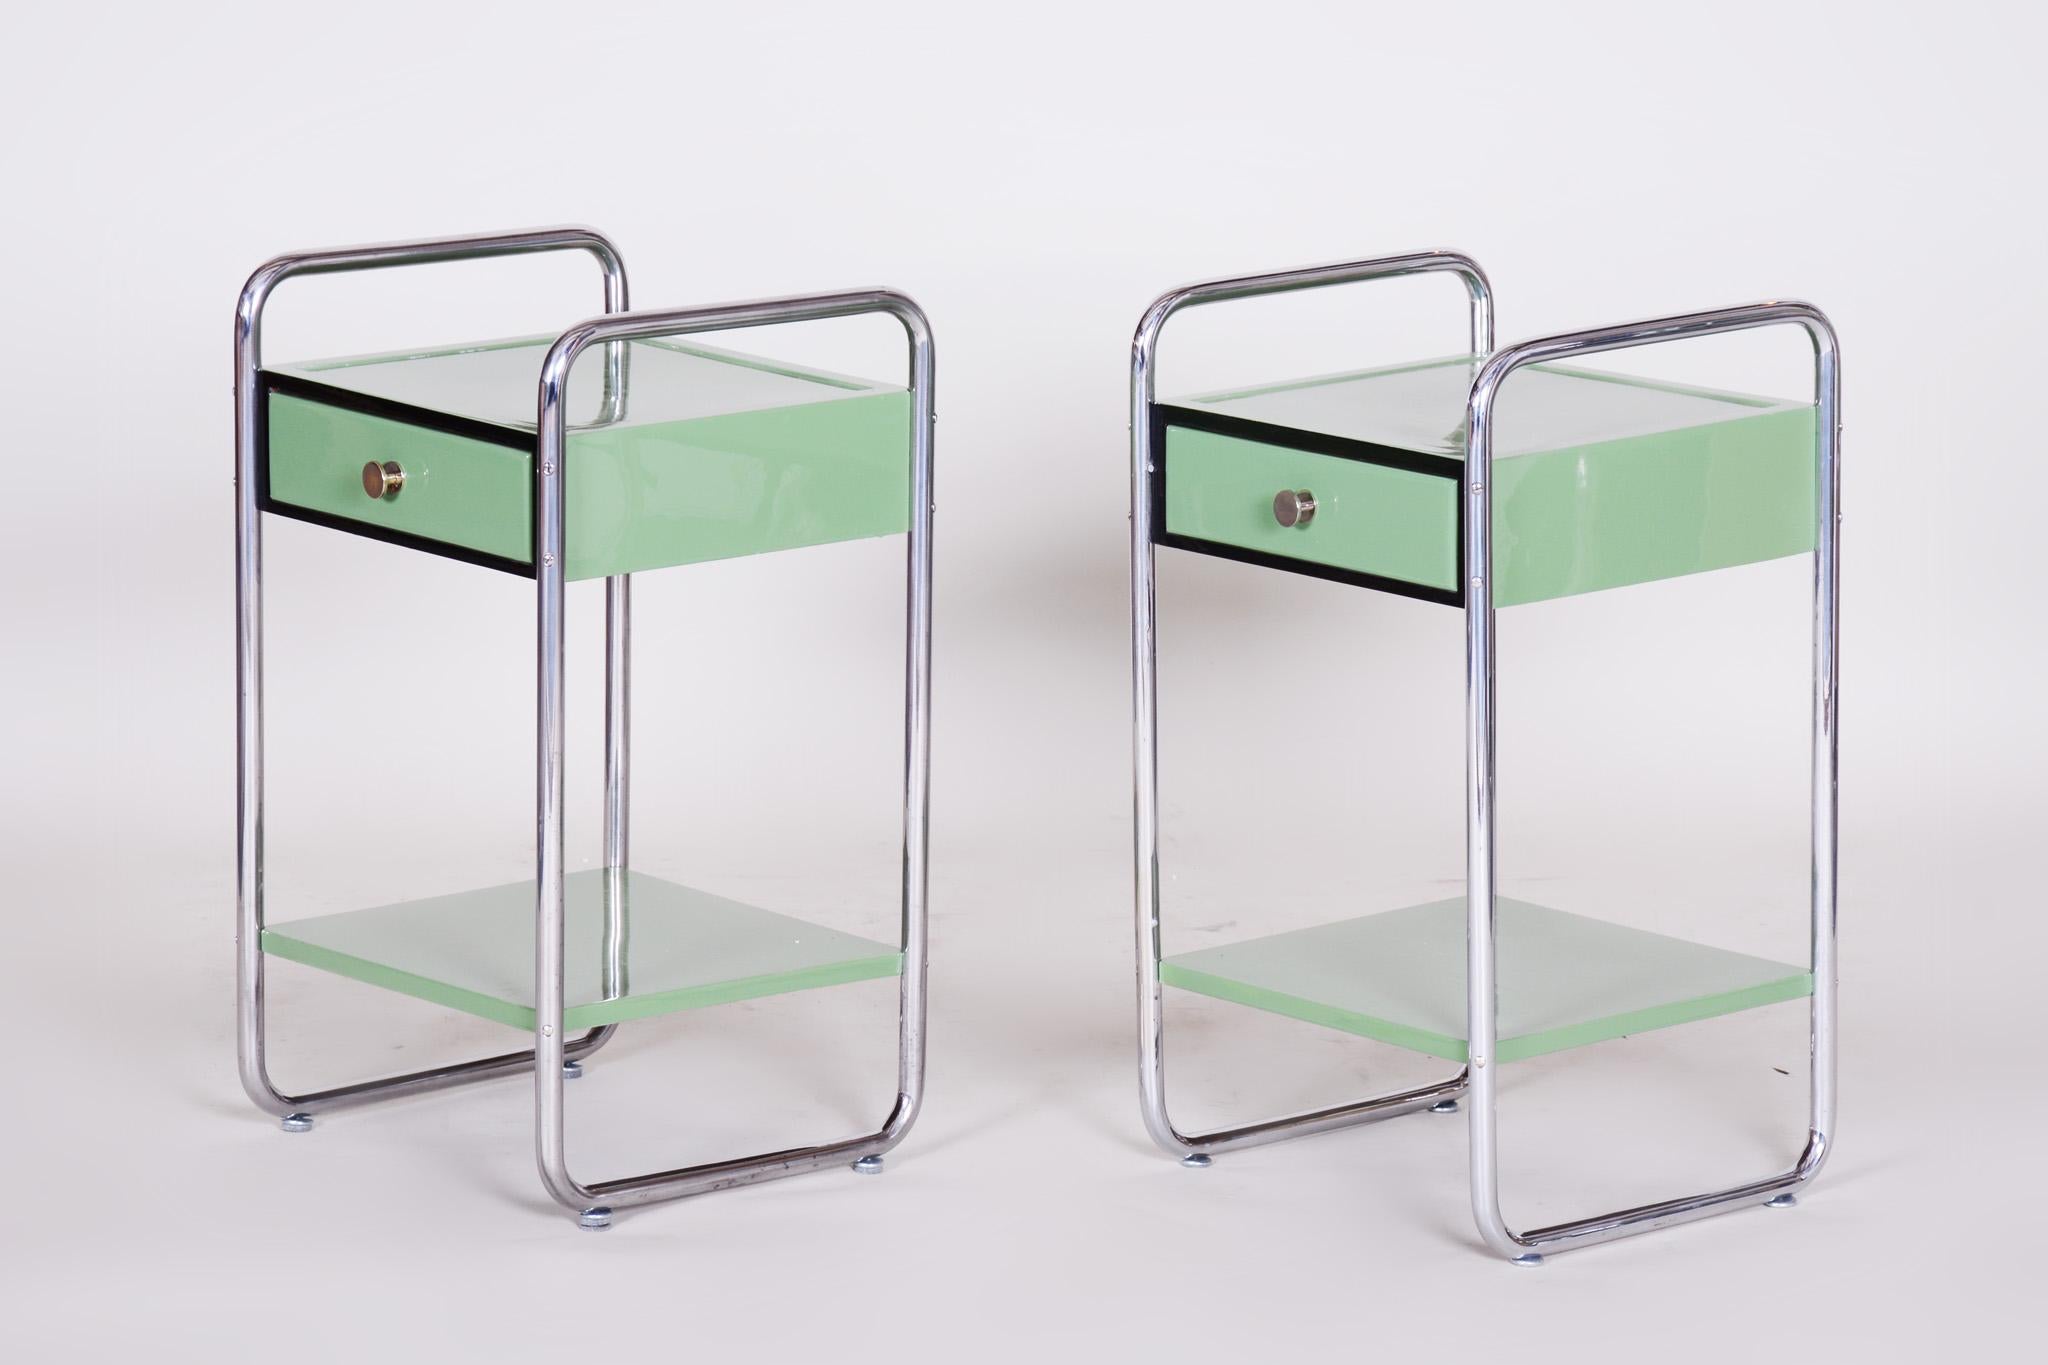 Restored Bauhaus Pair of Bed-Side Tables, Chrome-Plated Steel, Czech, 1930s For Sale 11